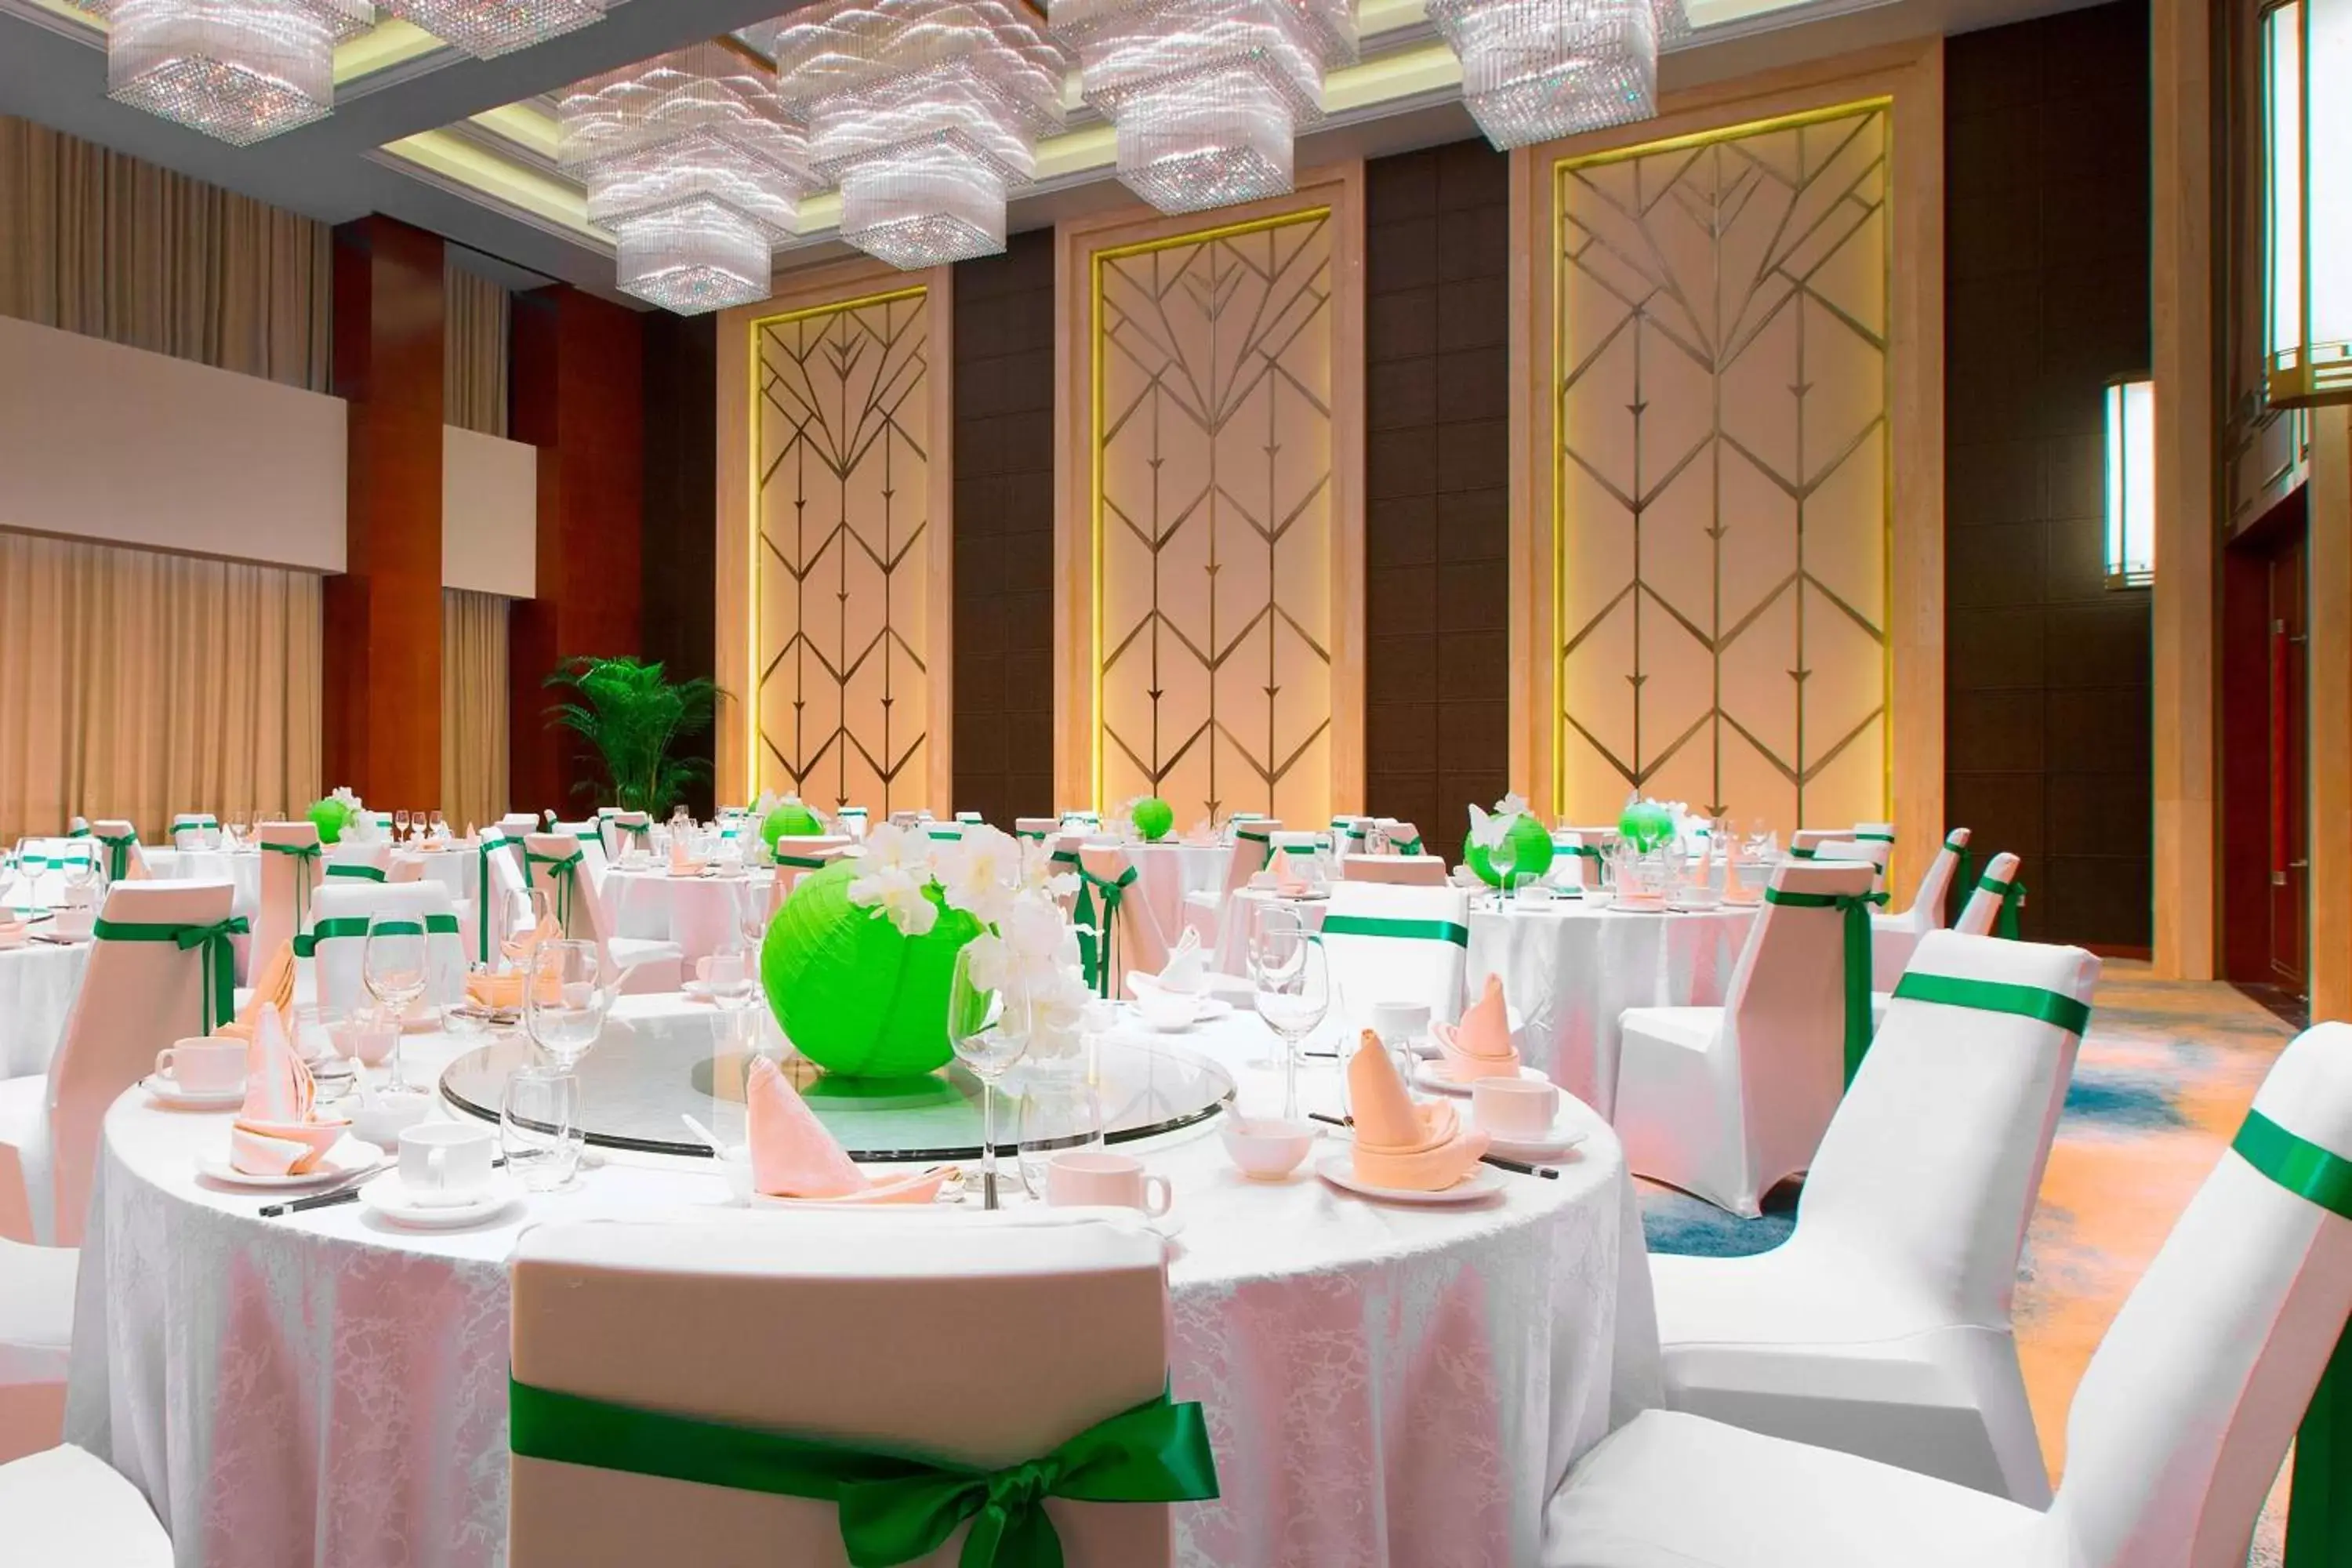 Meeting/conference room, Banquet Facilities in The Westin Qingdao - Instagrammable